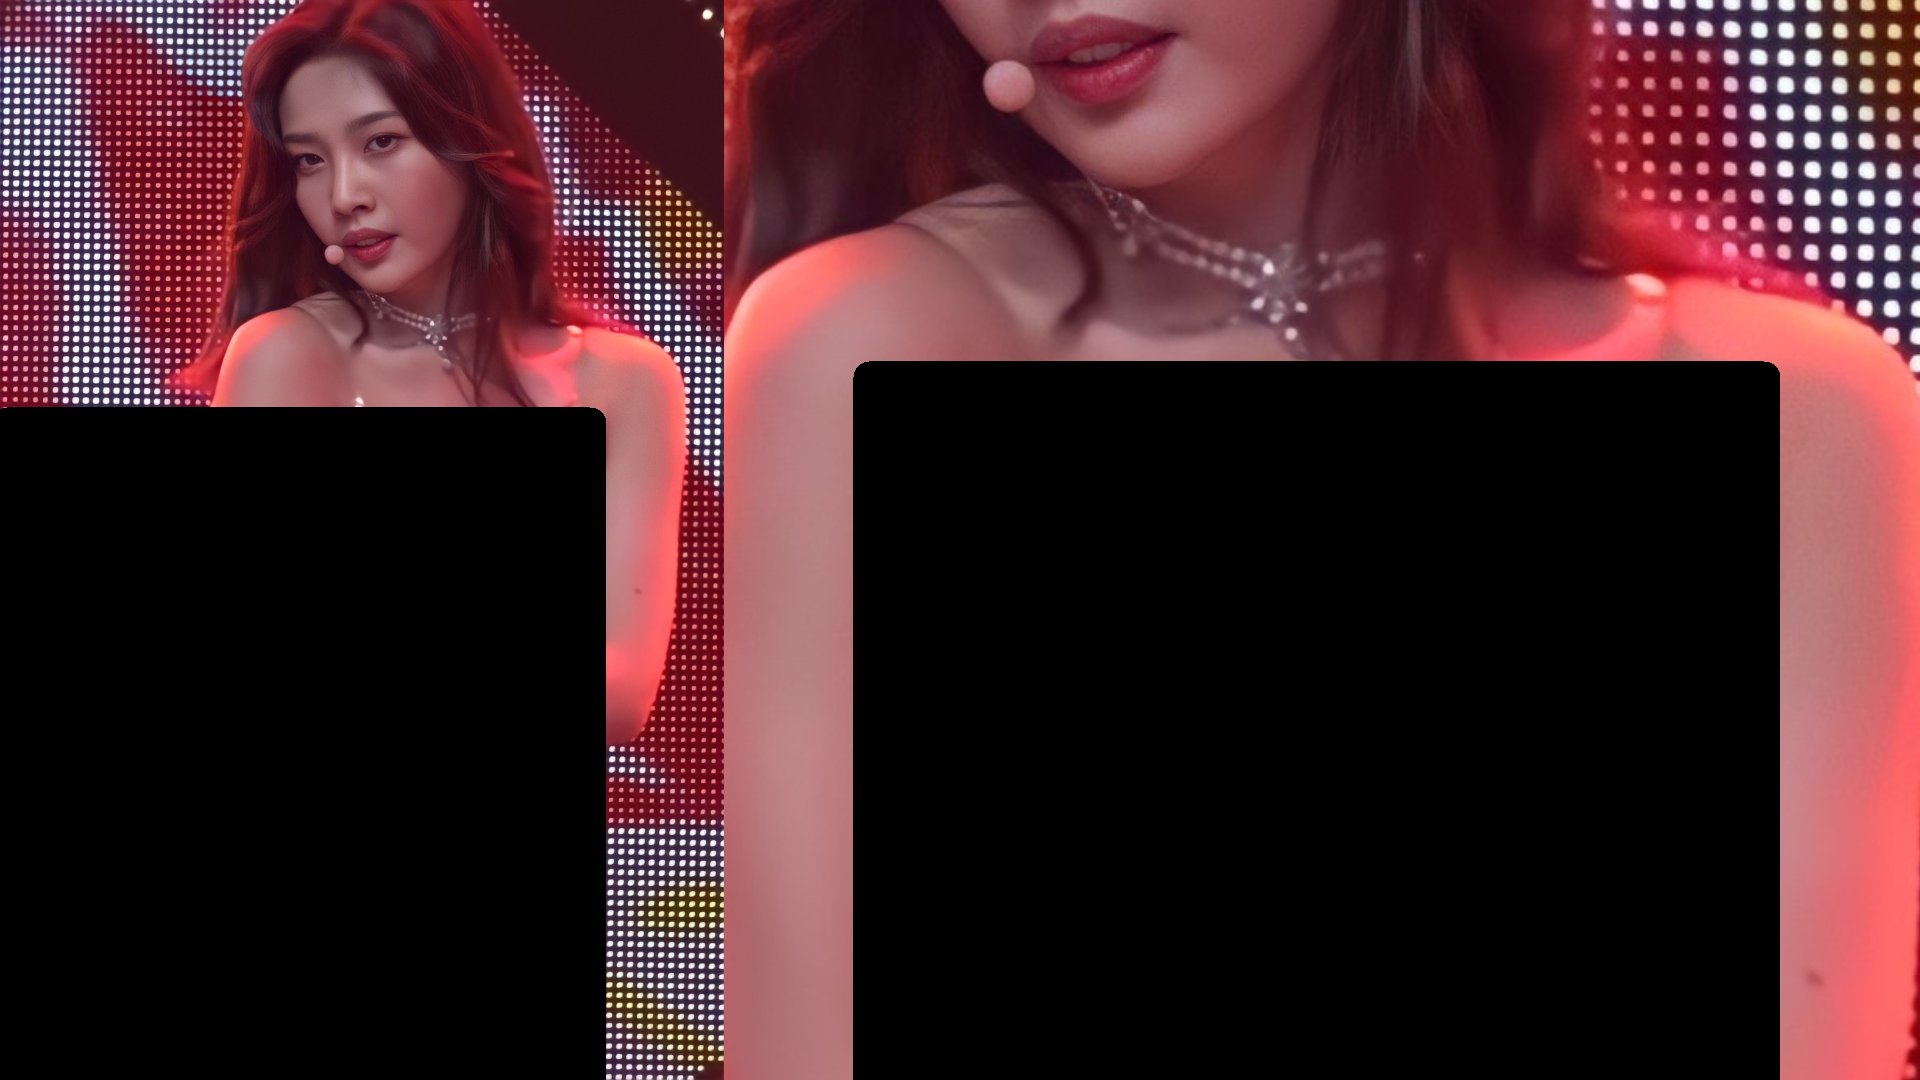 FJEV KPOP NSFW 2.0 on X: #REDVELVET #레드벨벳 - #JOY #조이 🙀🍒🍑 Uncensored  image is now available in my onlyfans ✓ Onlyfans: t.coPEh0tizrok  🔞 #kpop #idol #news t.comeV4ye2Cho  X